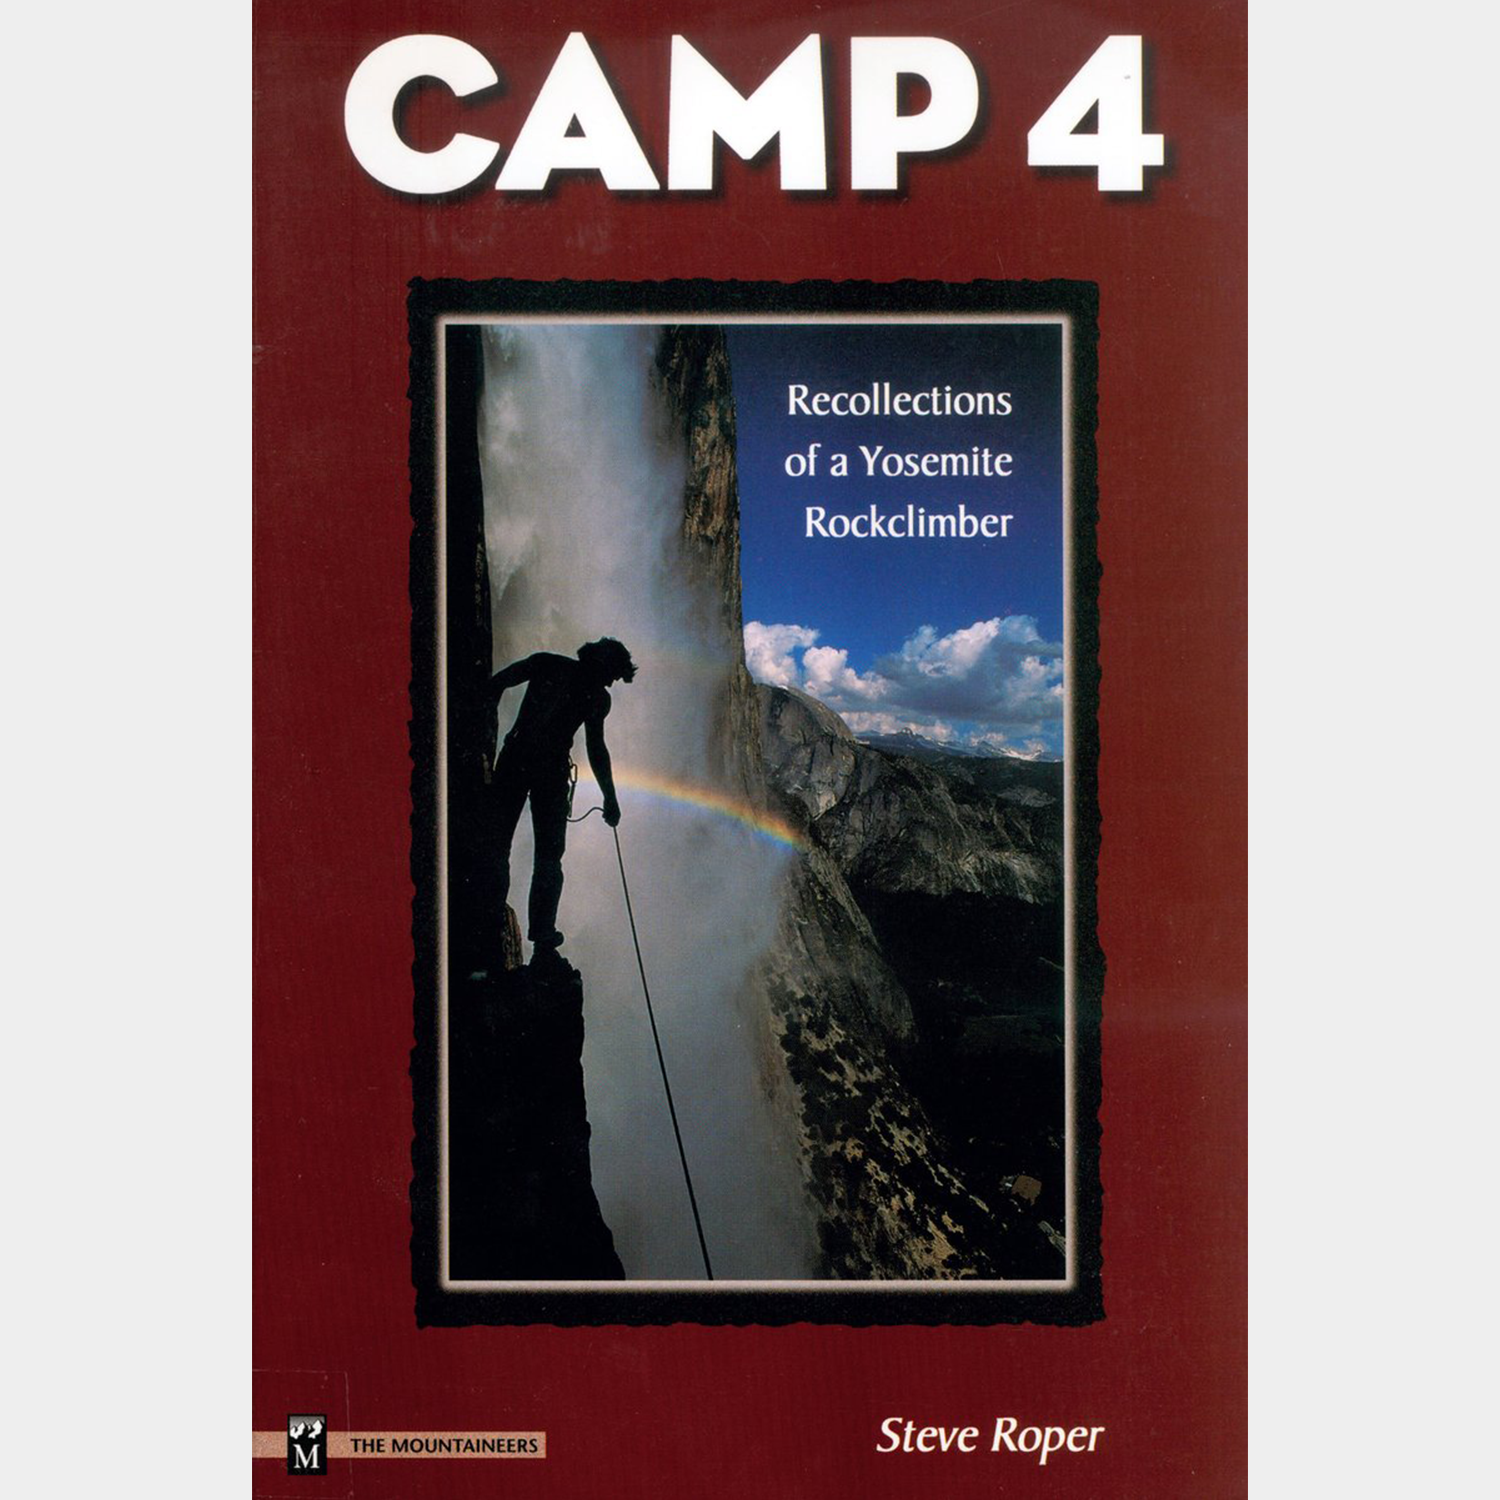 Camp 4 : Recollections of a Yosemite Rockclimber